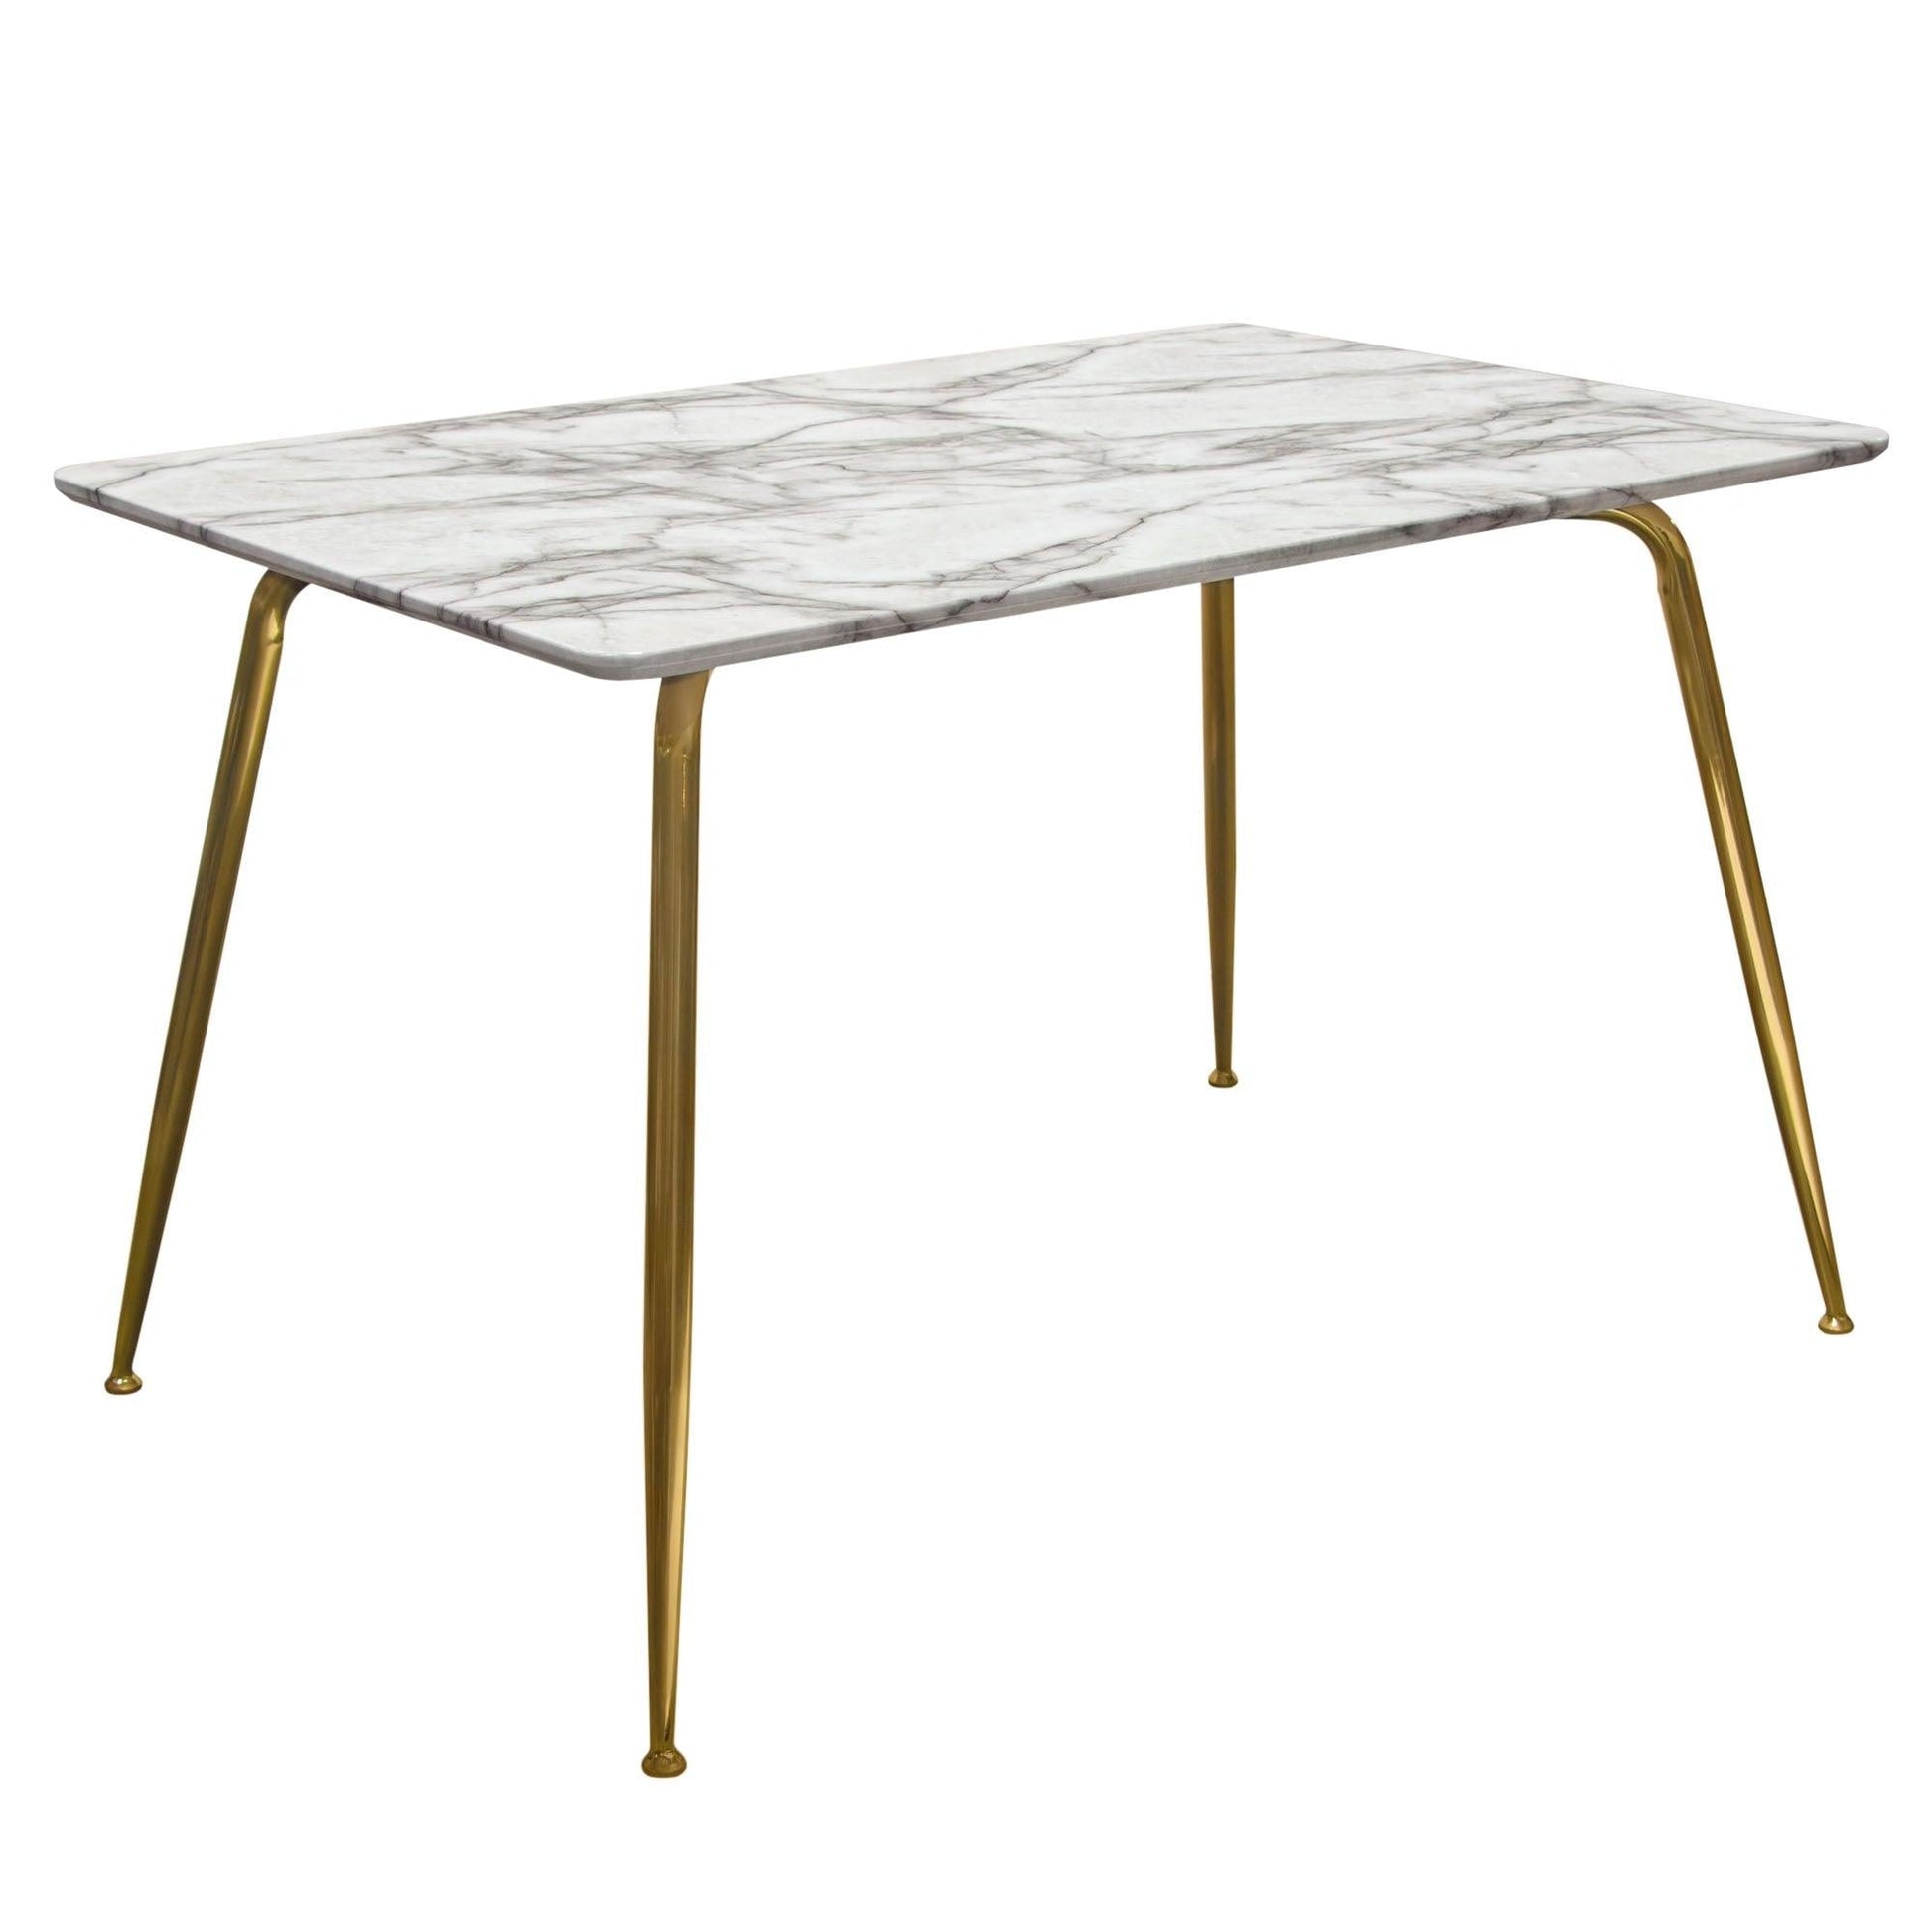 dionefurniture.myshopify.com-Rectangle Modern White Faux Marble Dinning Table